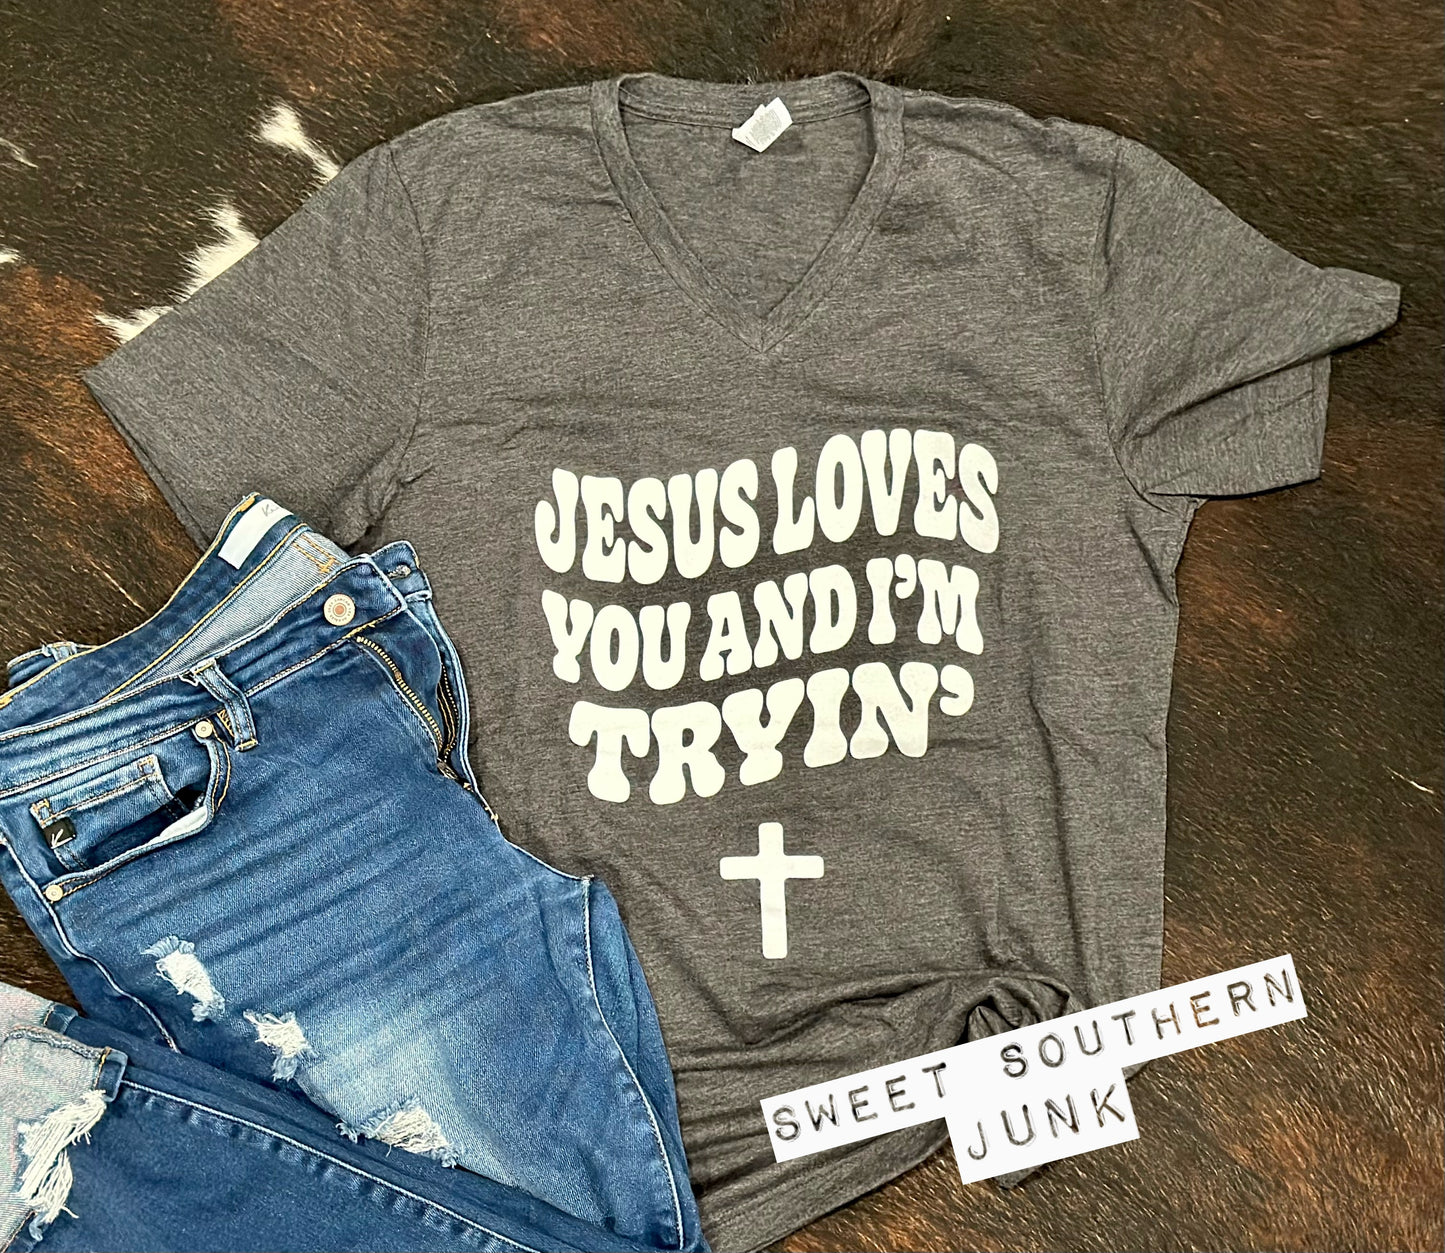 Jesus loves you and I’m tryin’